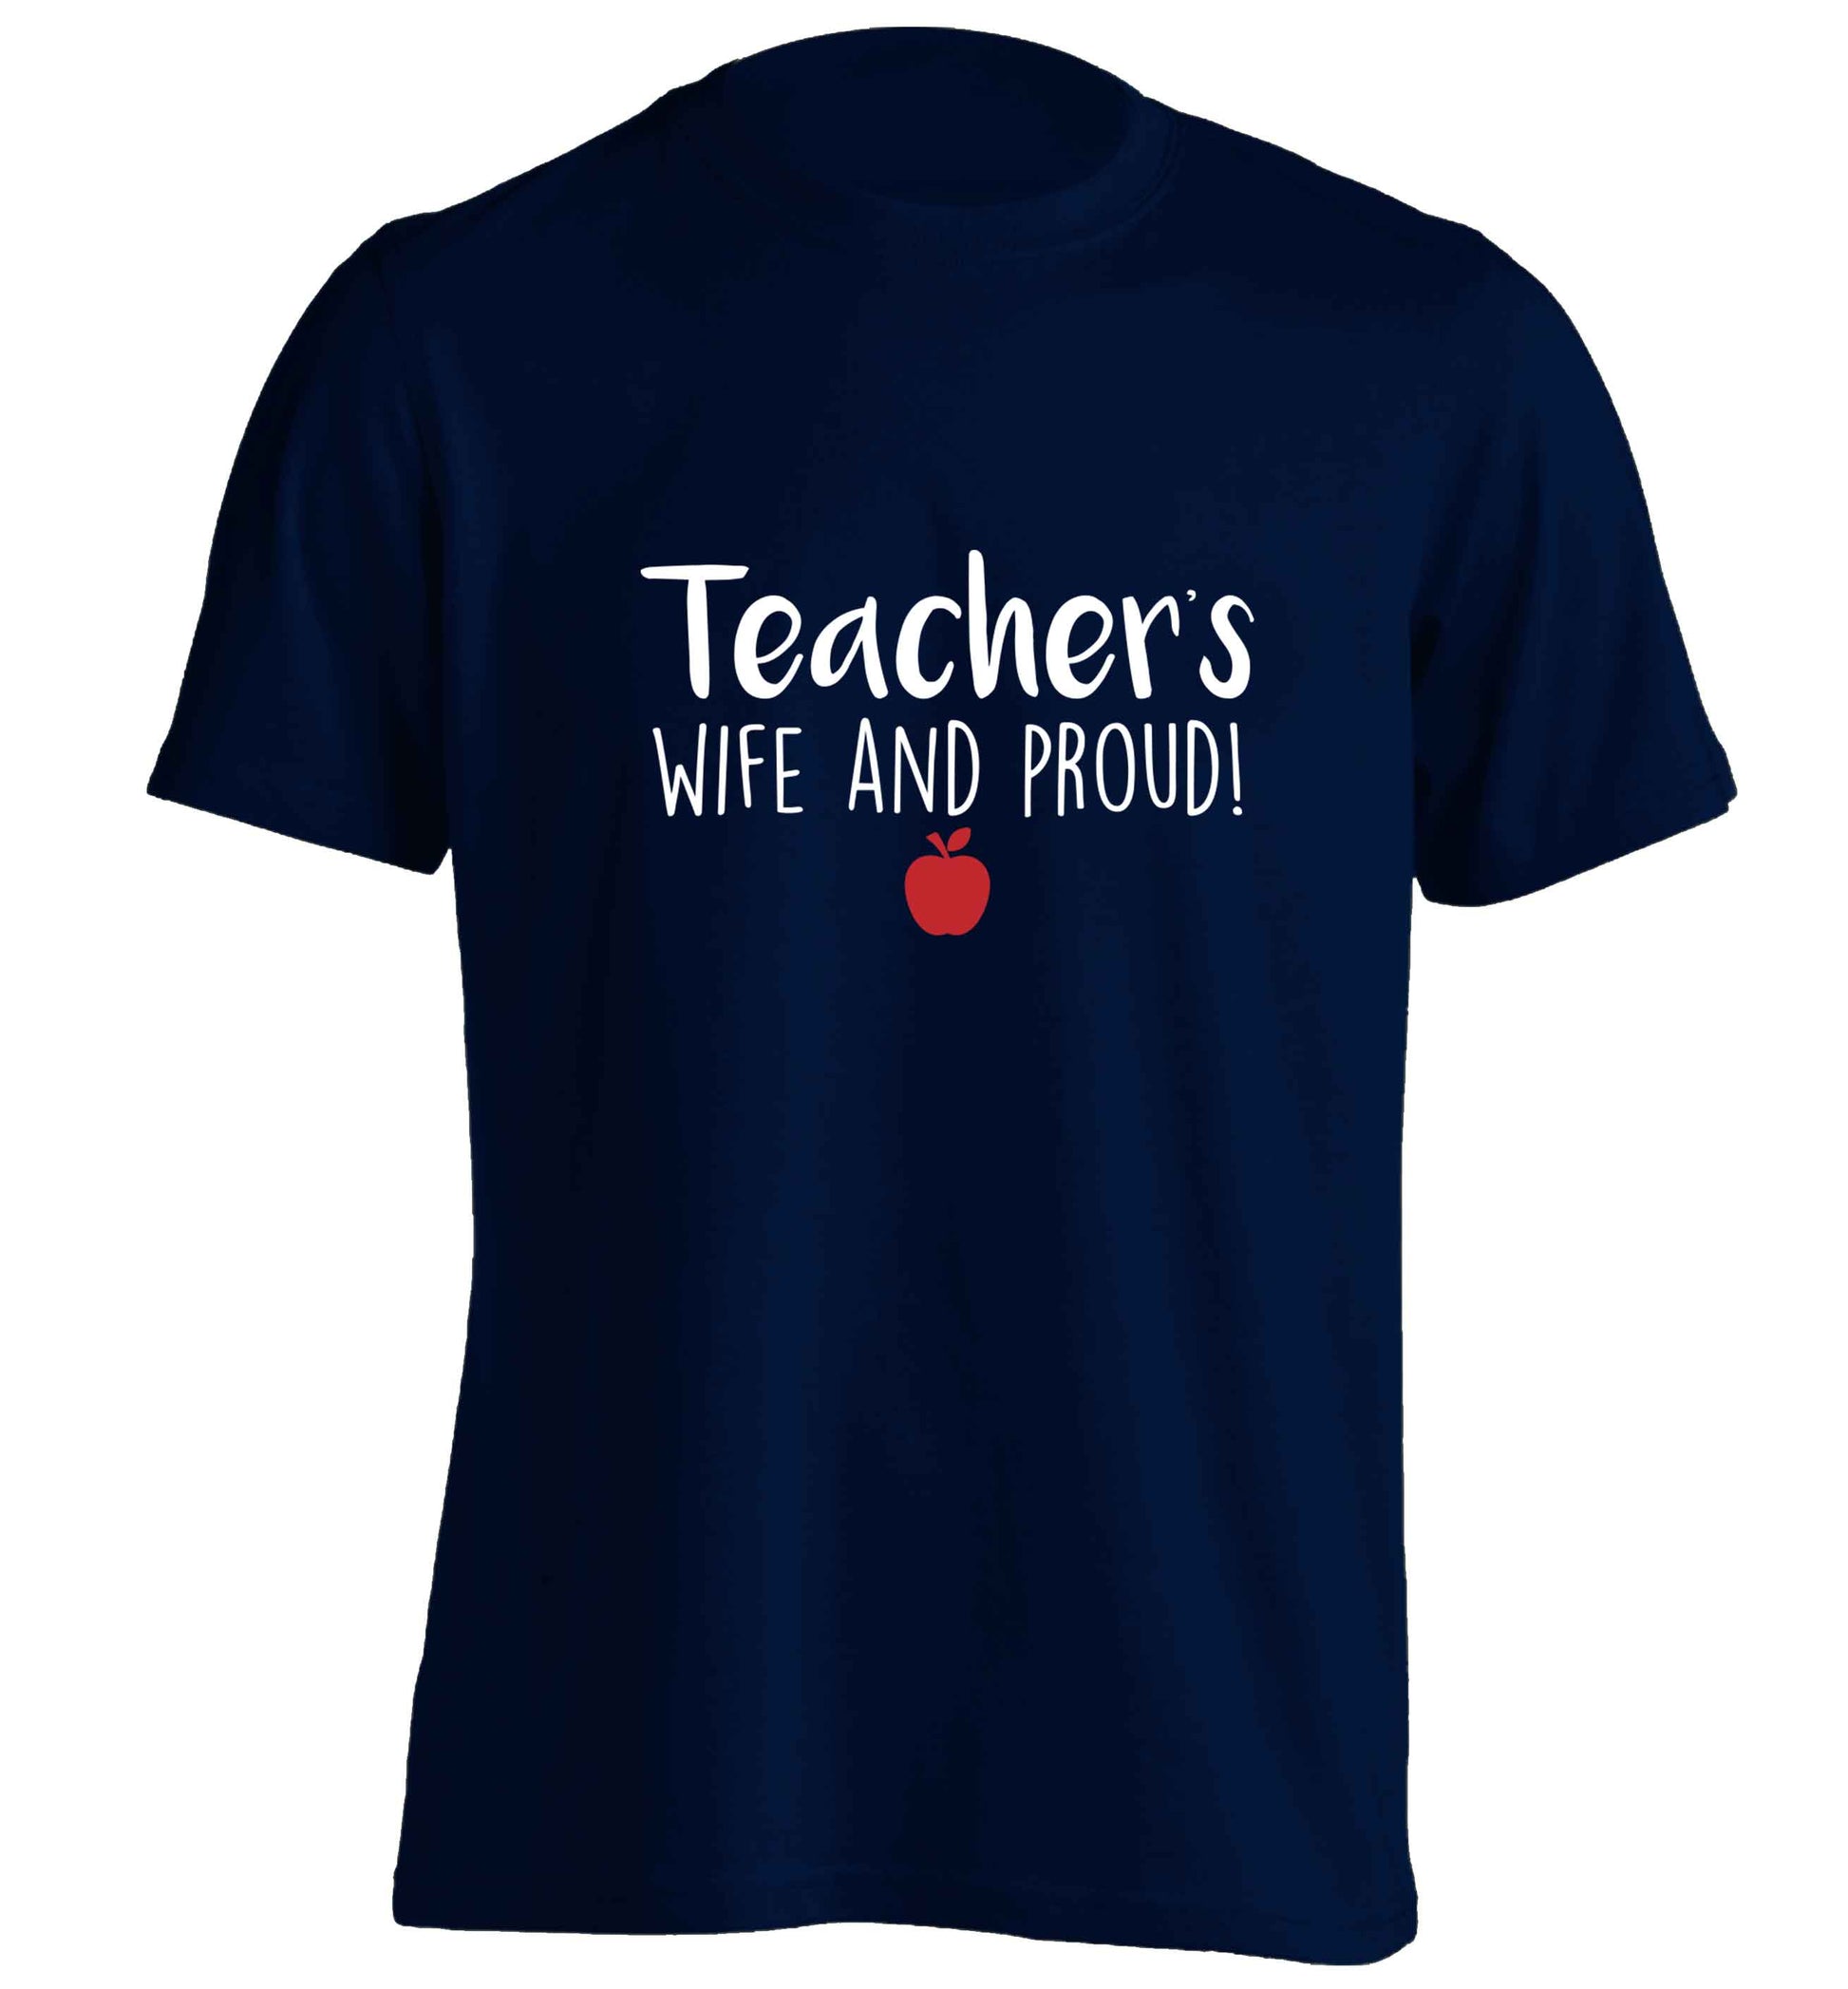 Teachers wife and proud adults unisex navy Tshirt 2XL